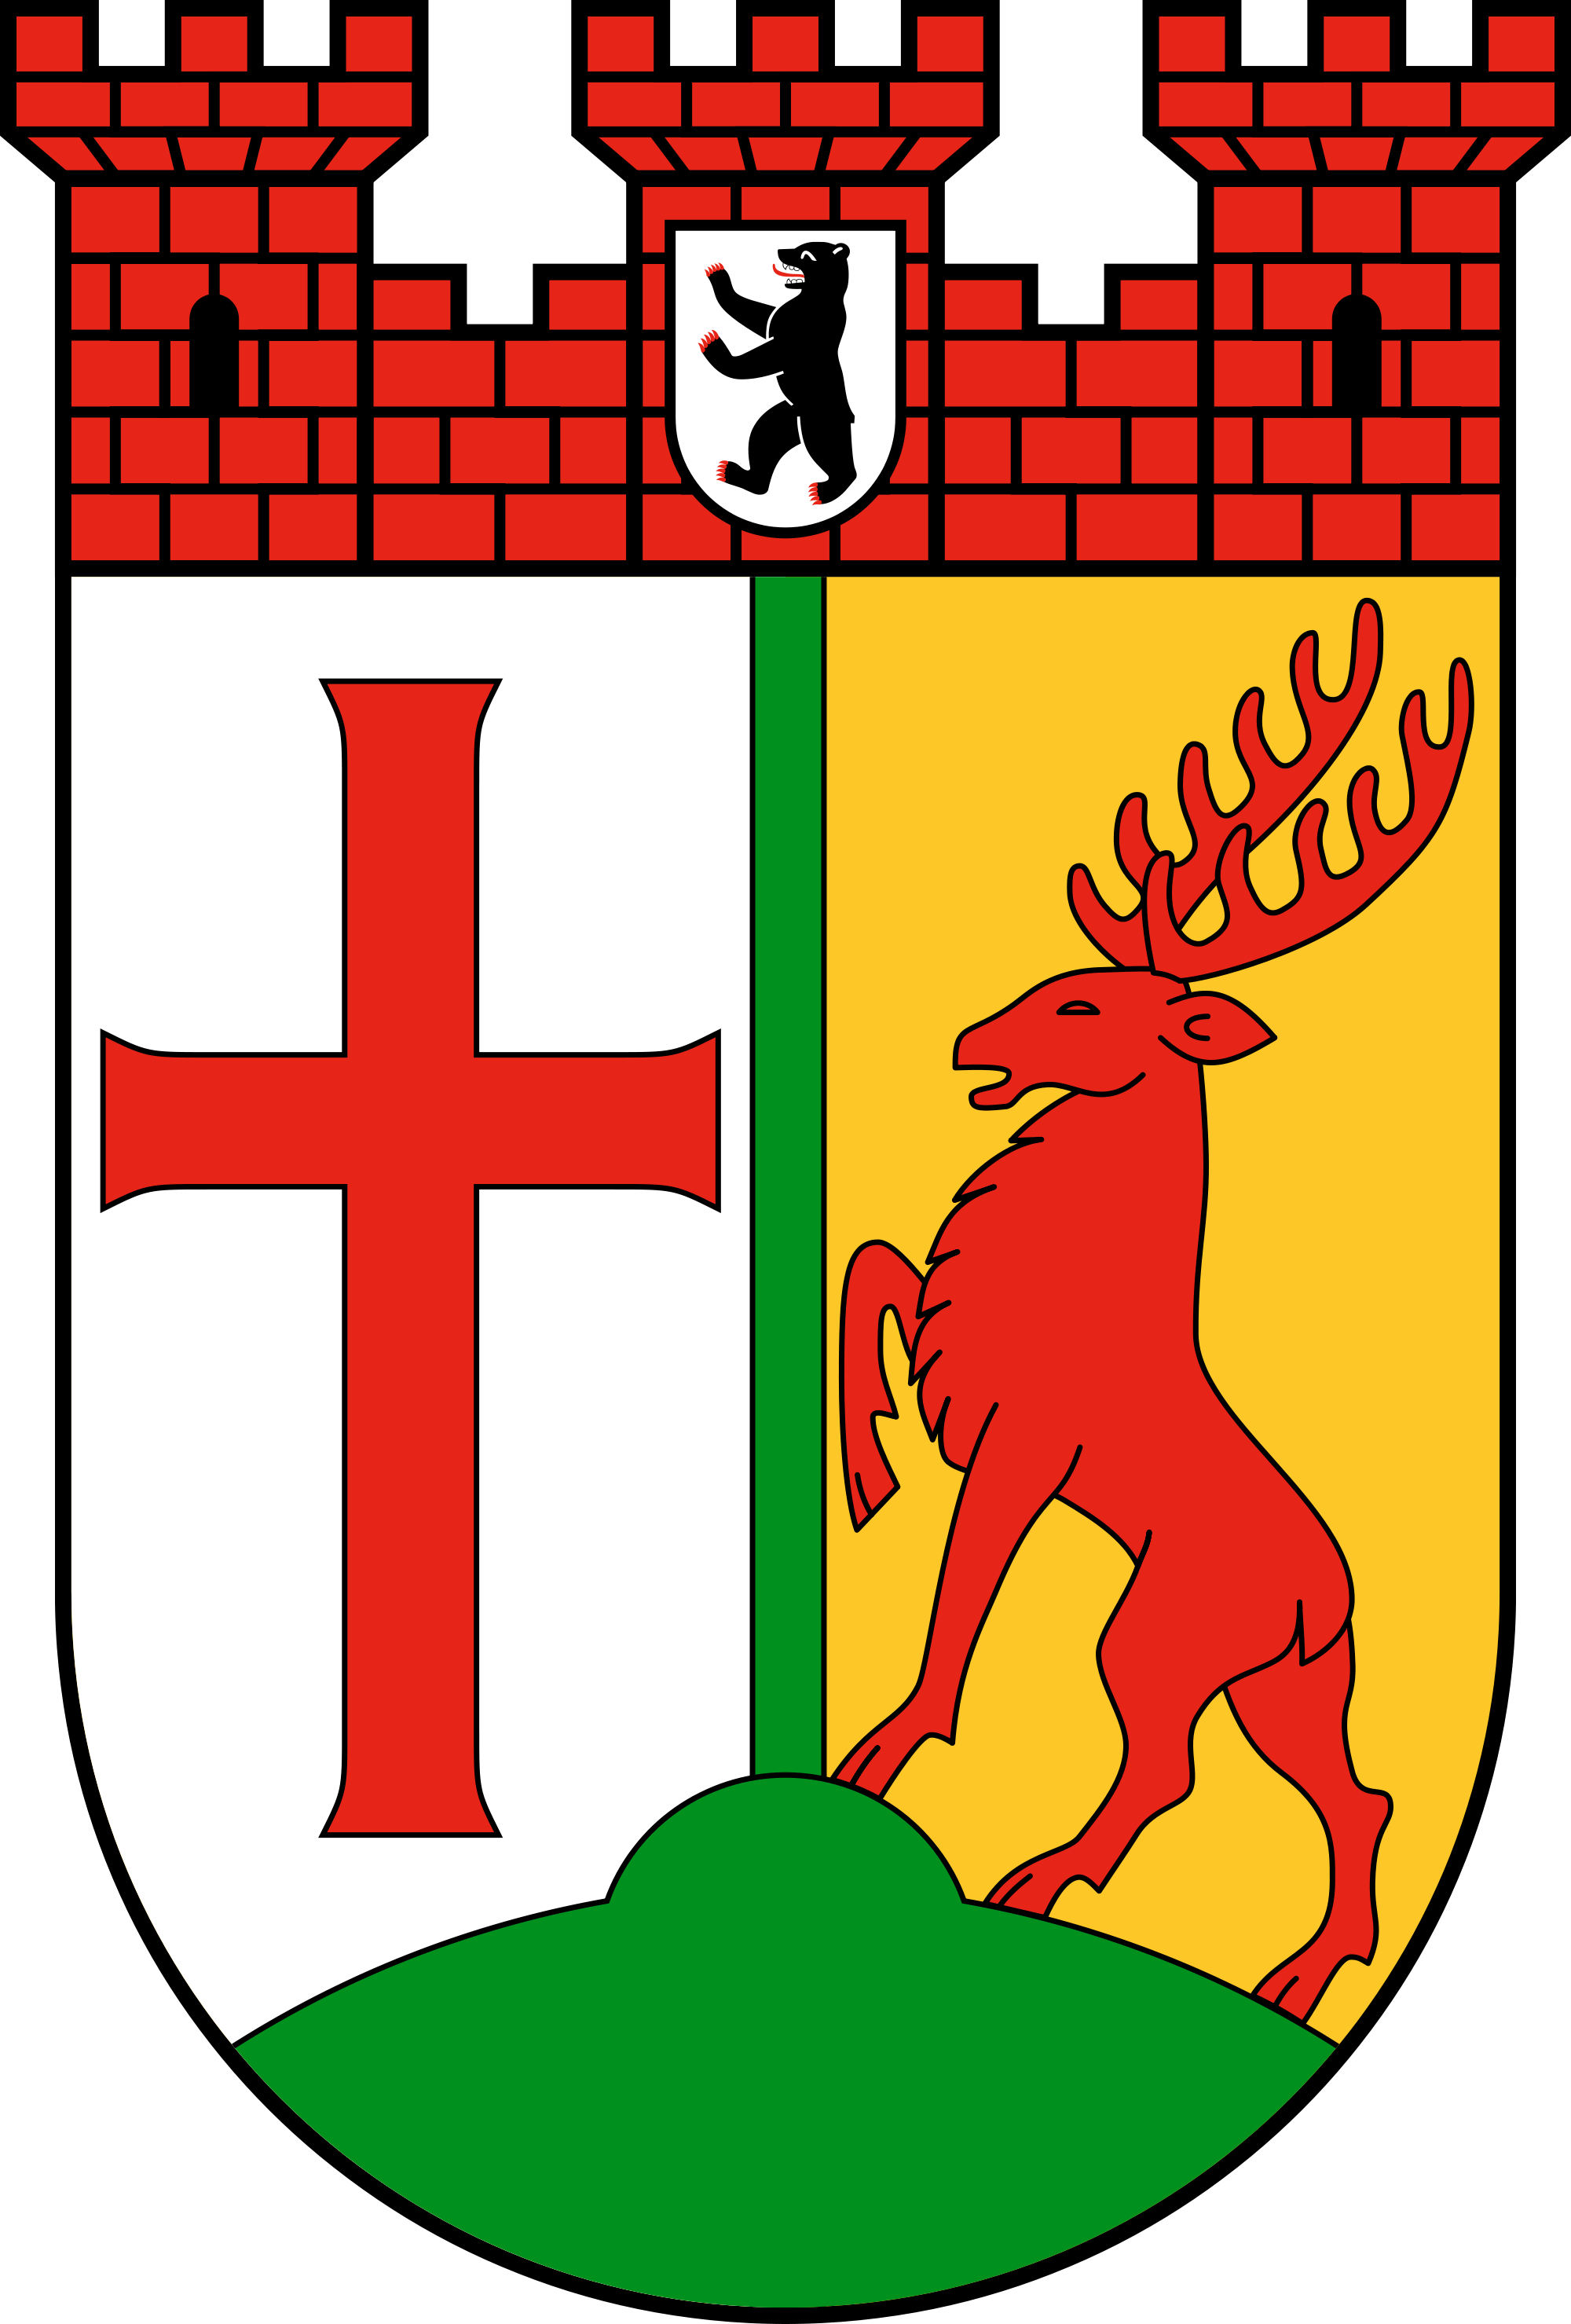 Wappen - Quelle: http://upload.wikimedia.org/wikipedia/commons/thumb/9/92/Coat_of_arms_of_borough_Tempelhof-Schoeneberg.svg/2000px-Coat_of_arms_of_borough_Tempelhof-Schoeneberg.svg.png